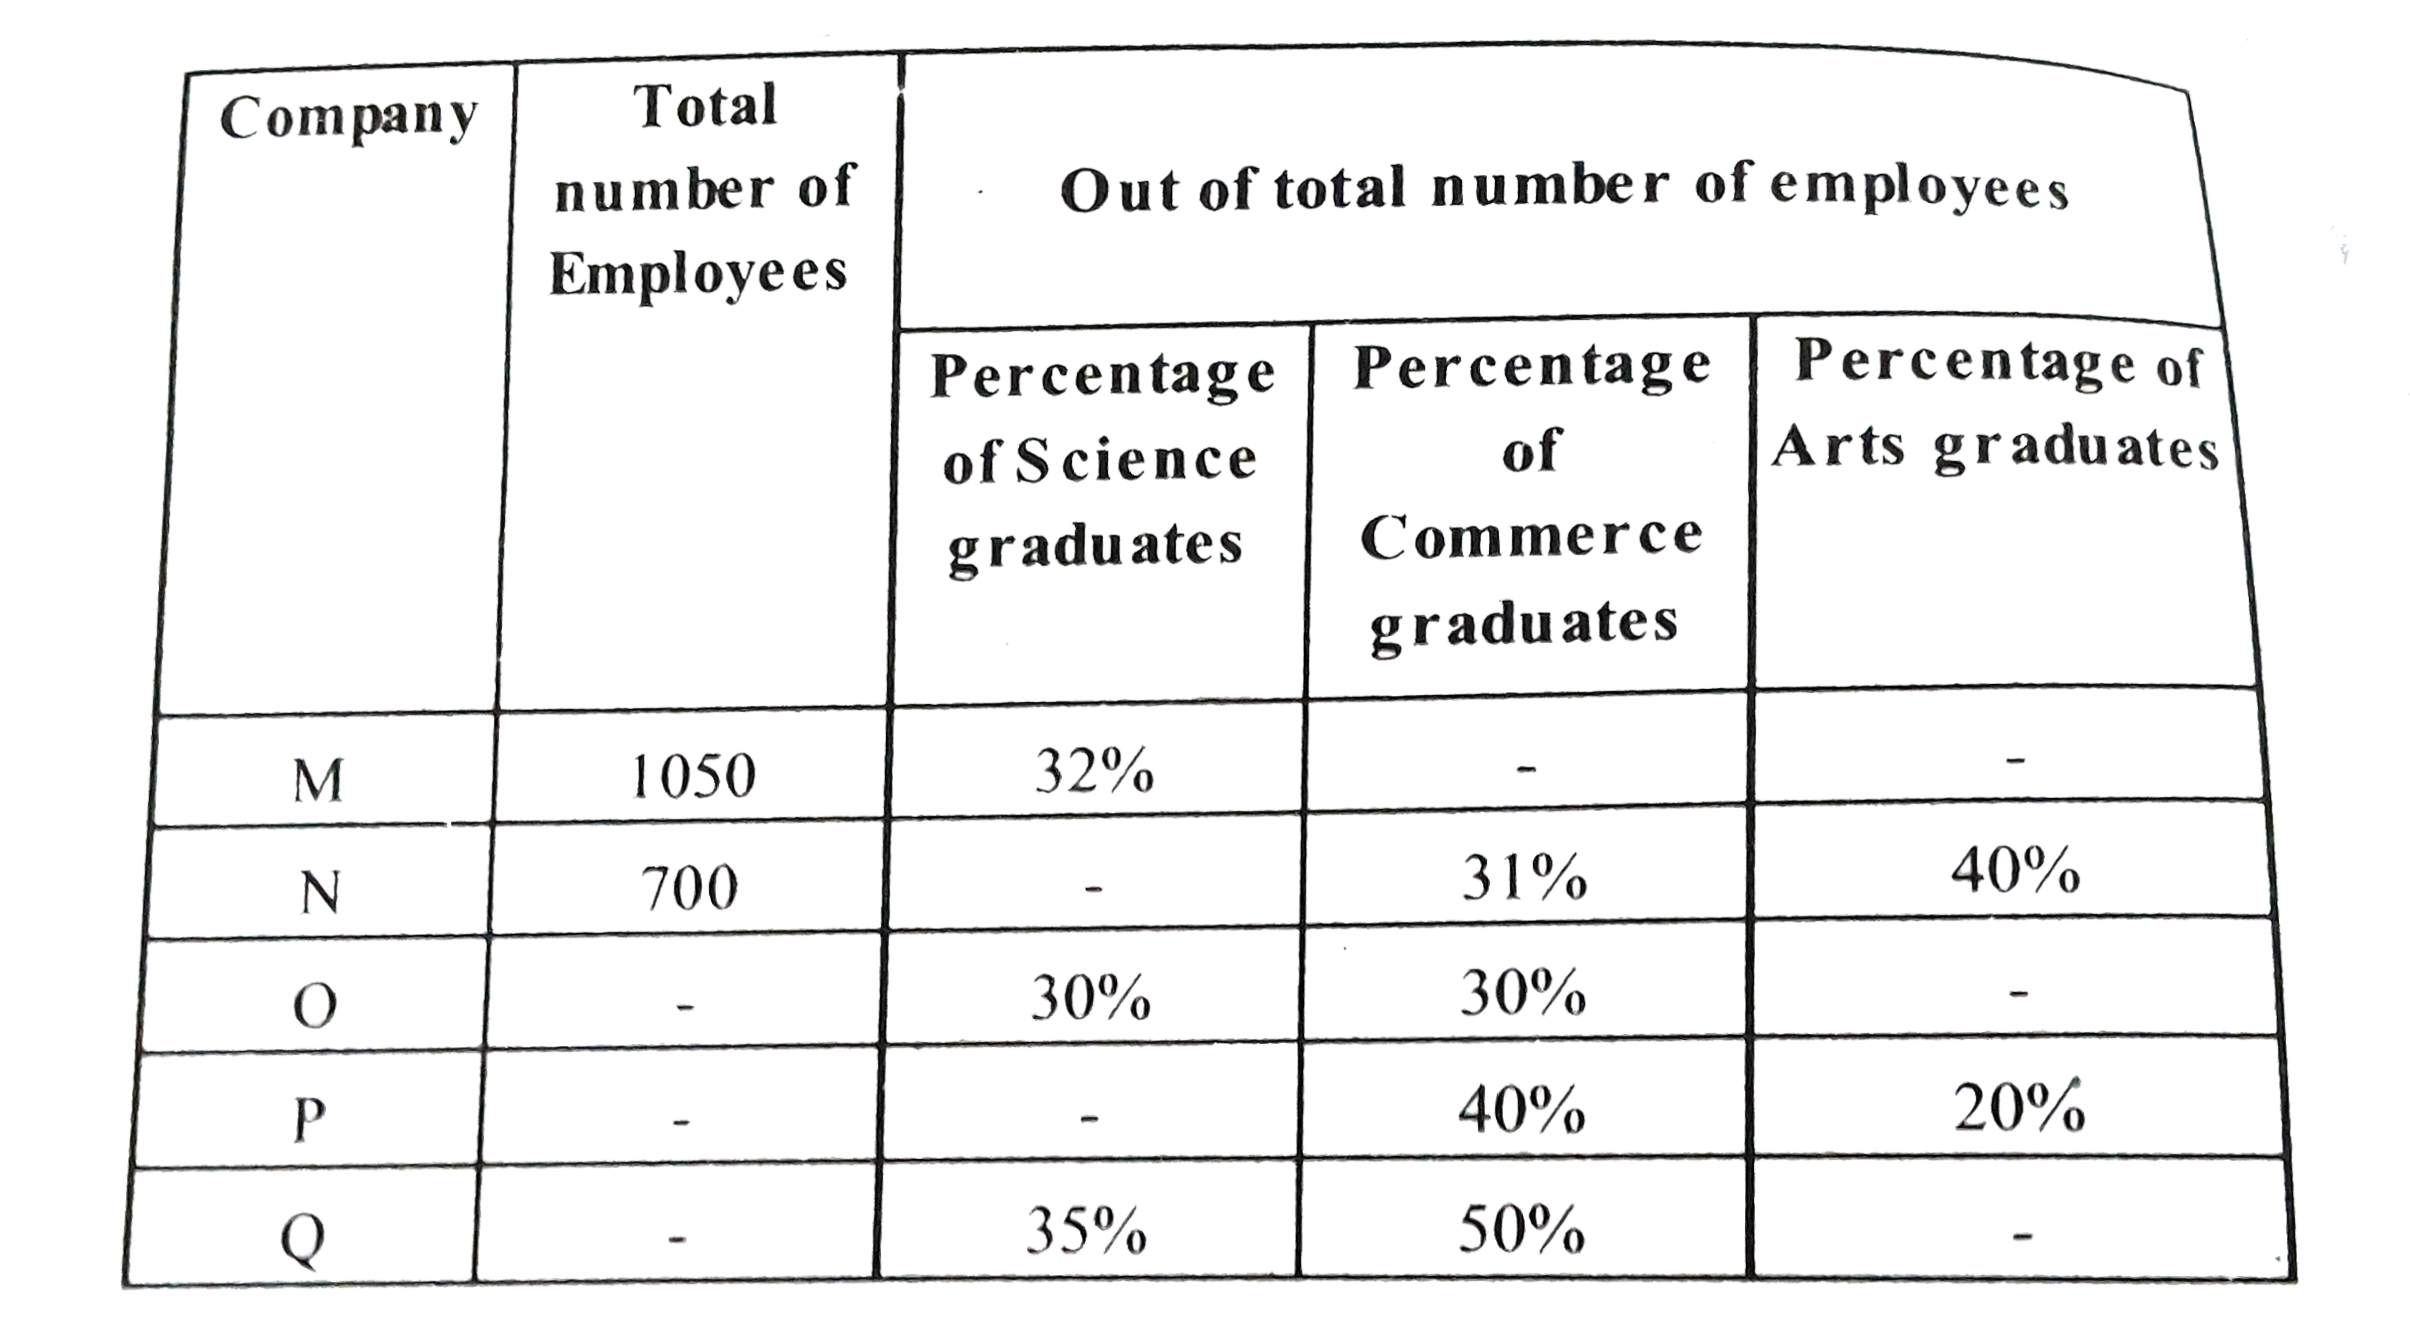 Note :  (I) Employees of the given companies can be categorised only in three tpyes : Science graduates, Commerce graduates and Arts graduates   (II) A few values are missing in the table (indicated) A. candidate is expected to calculate the missing value, if it is required to answer the given question, on the basis of the given data and infomation.   What is the difference between the number of Arts graduarte employees and Science graduate employees in Company N ?